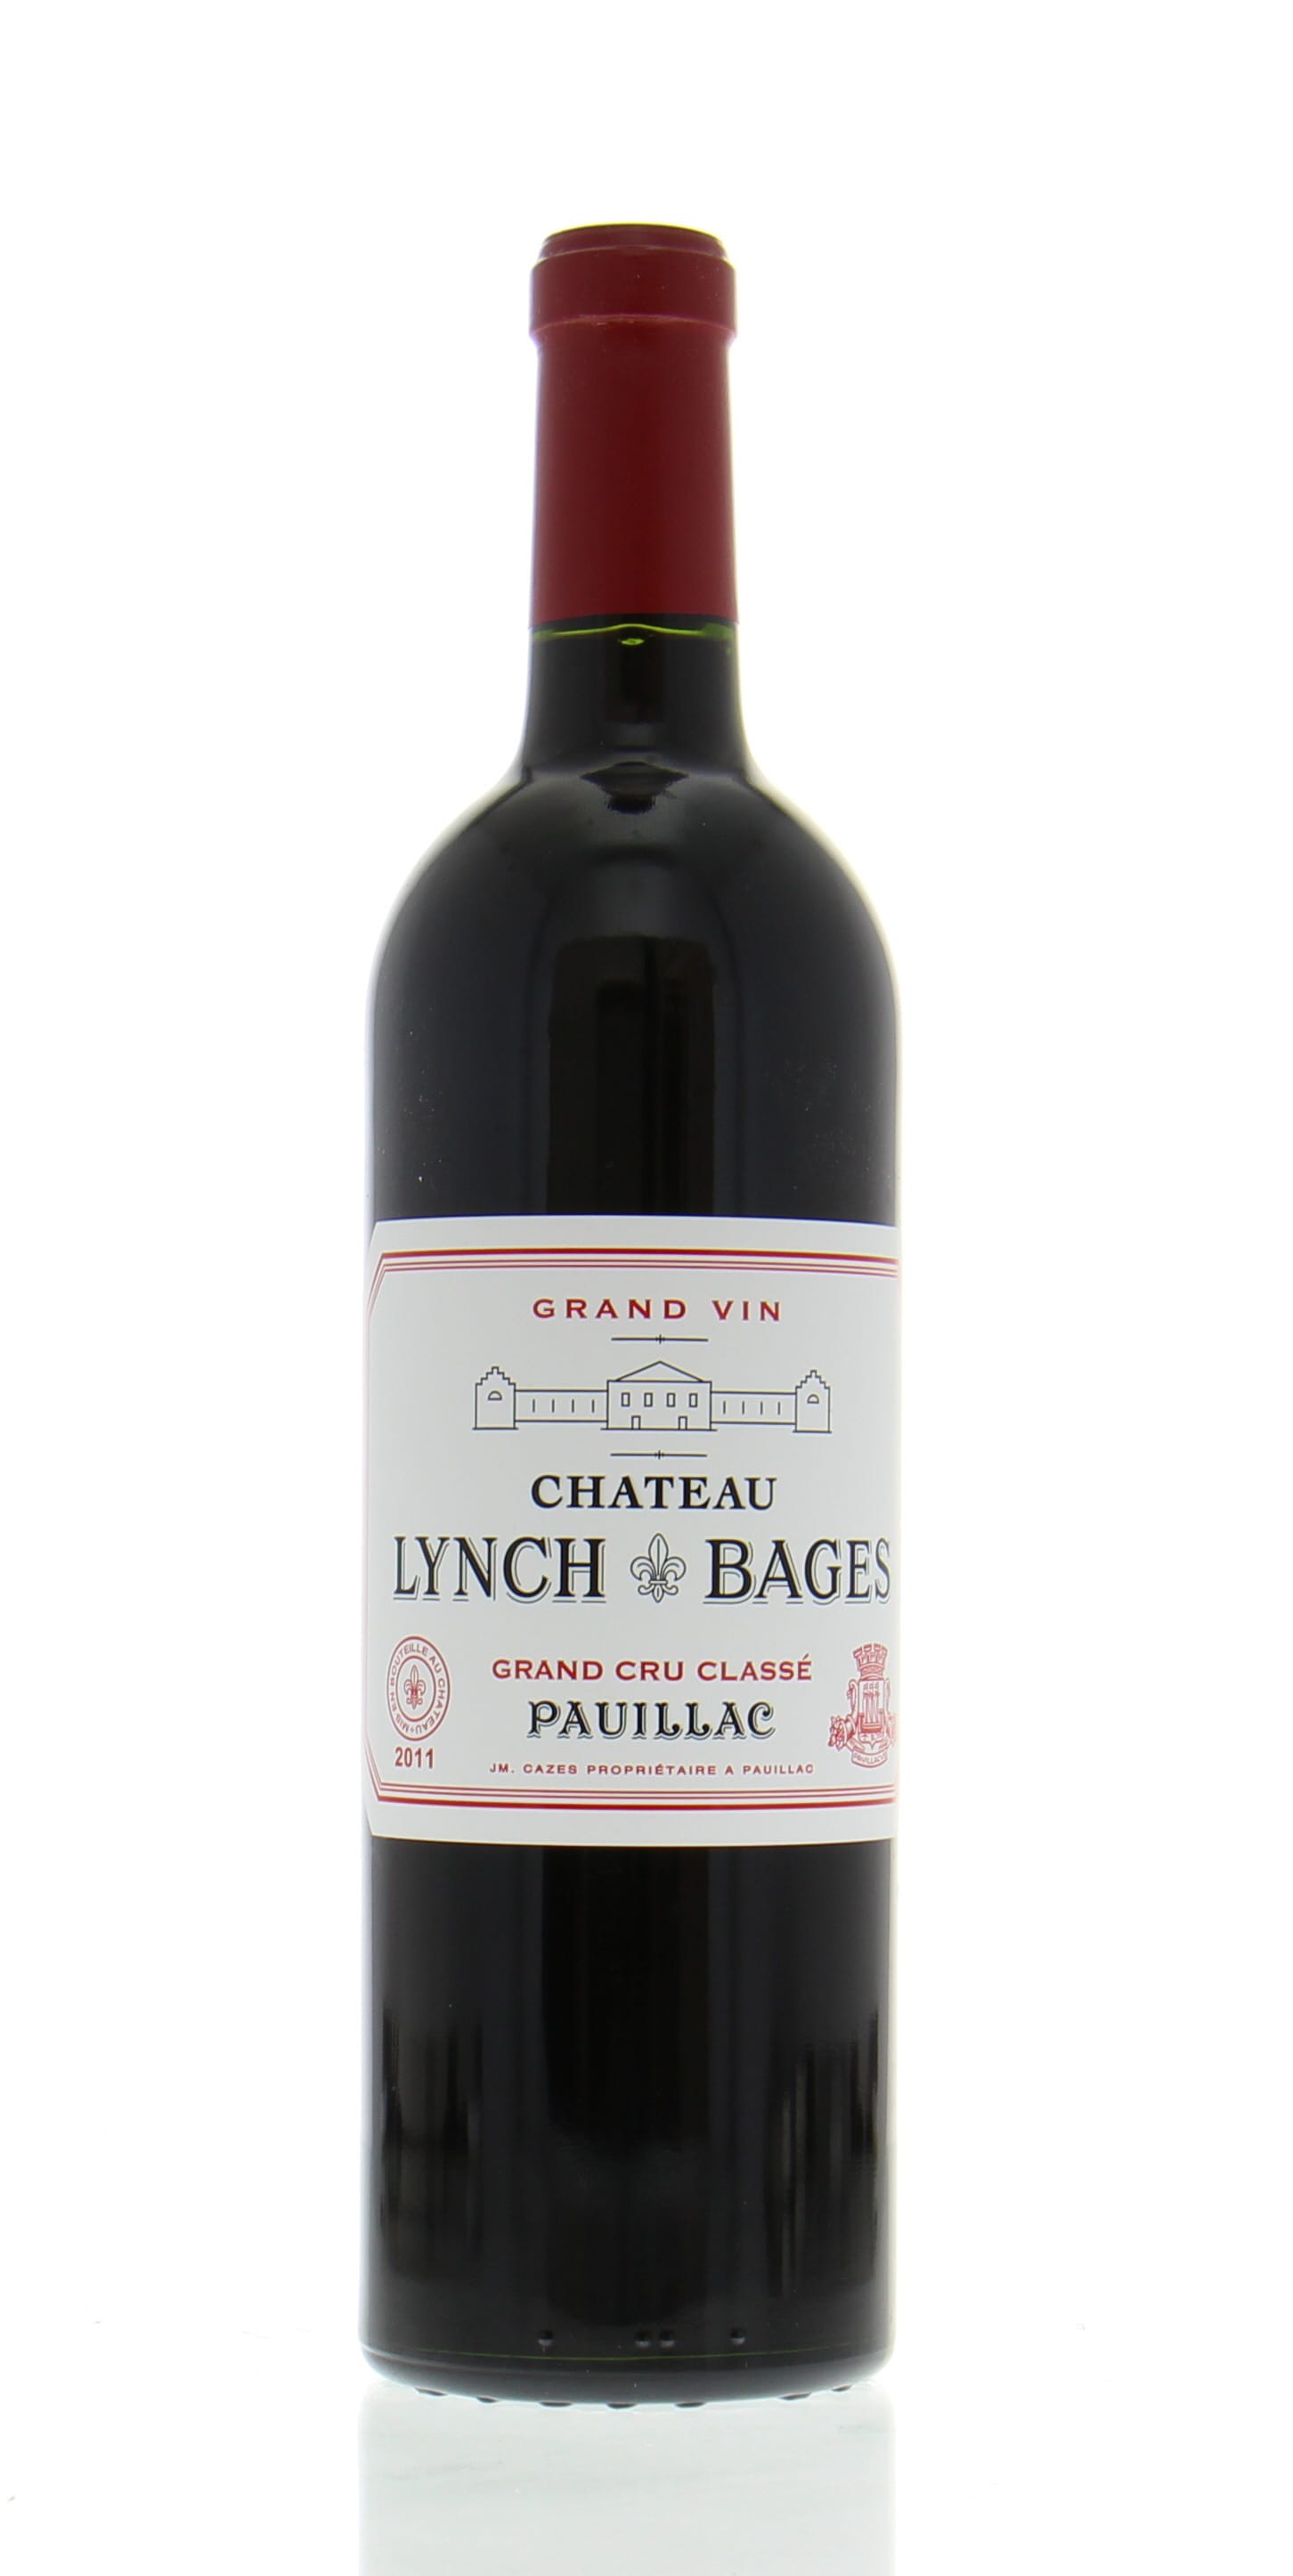 Chateau Lynch Bages - Chateau Lynch Bages 2011